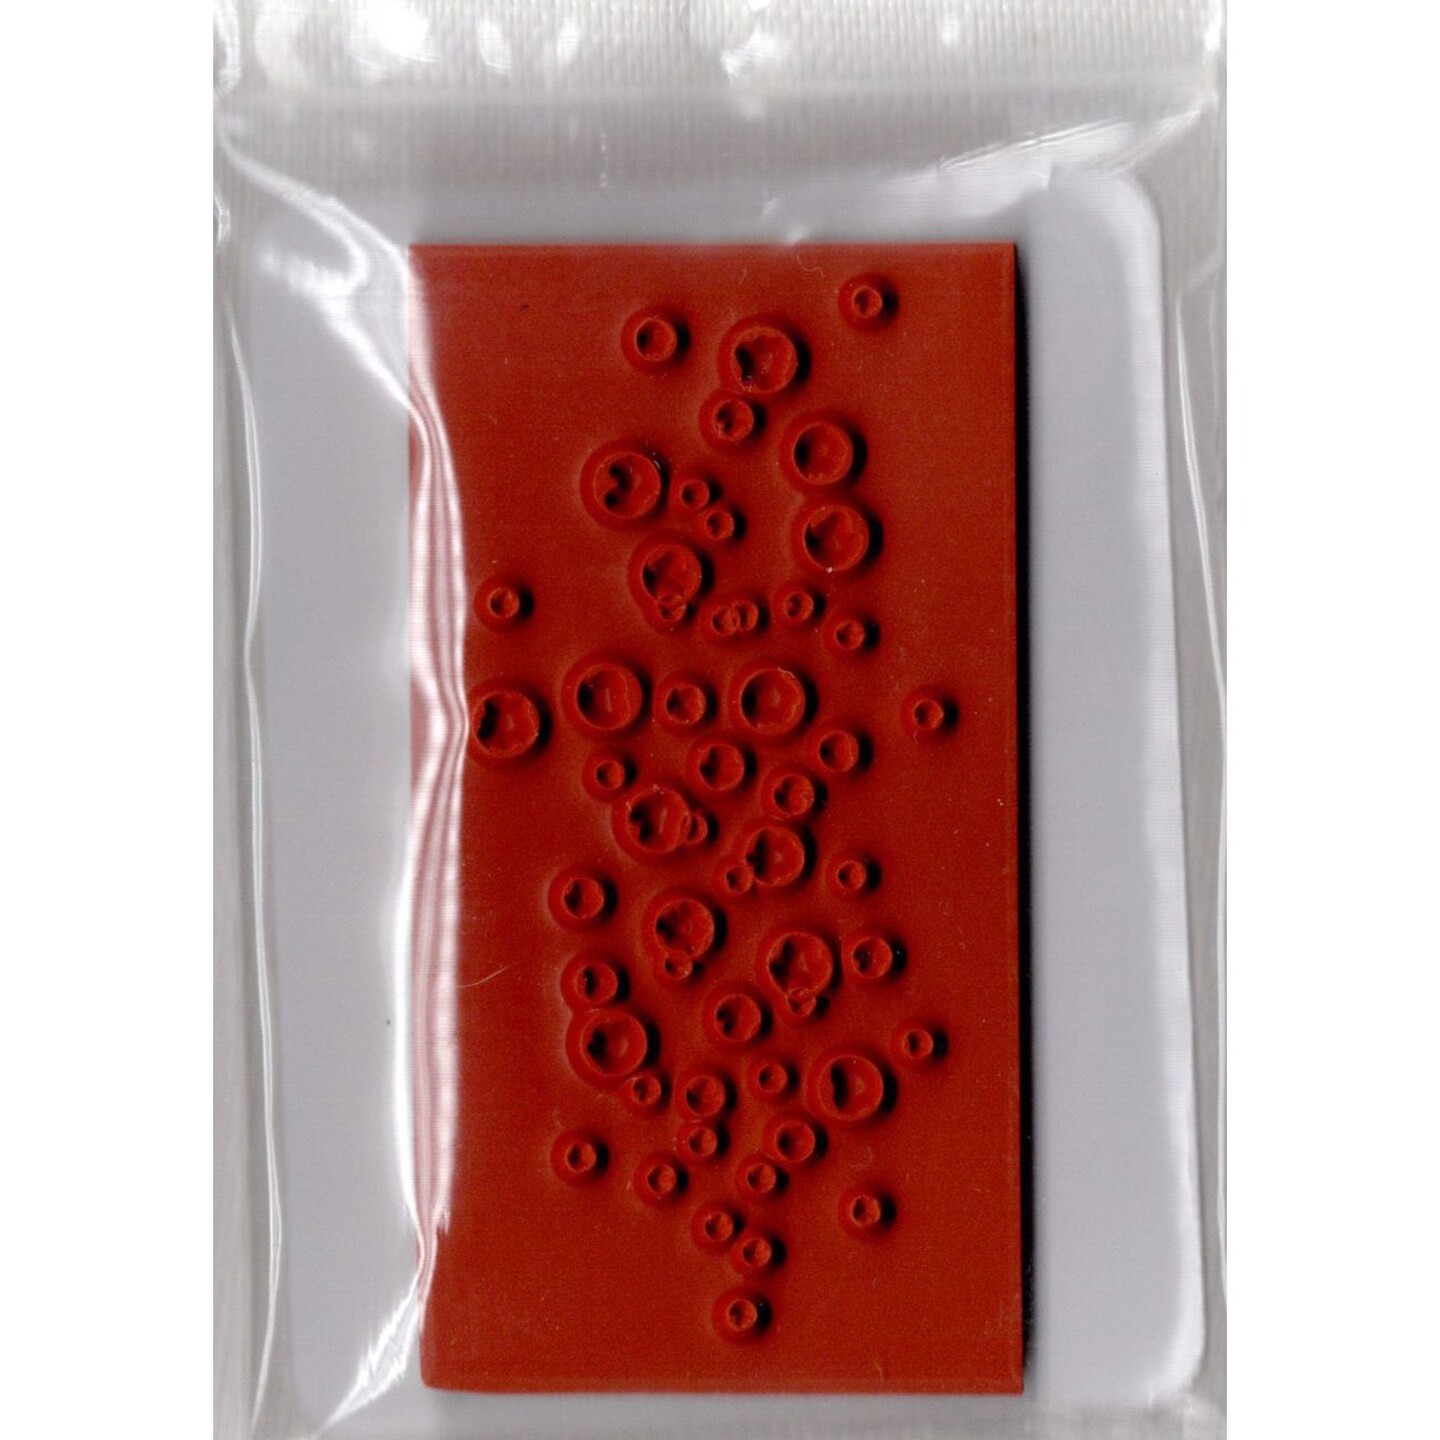 Deep Red Stamps Fizzy Bubbles Rubber Cling Stamp 1.6 x 3.3 inches